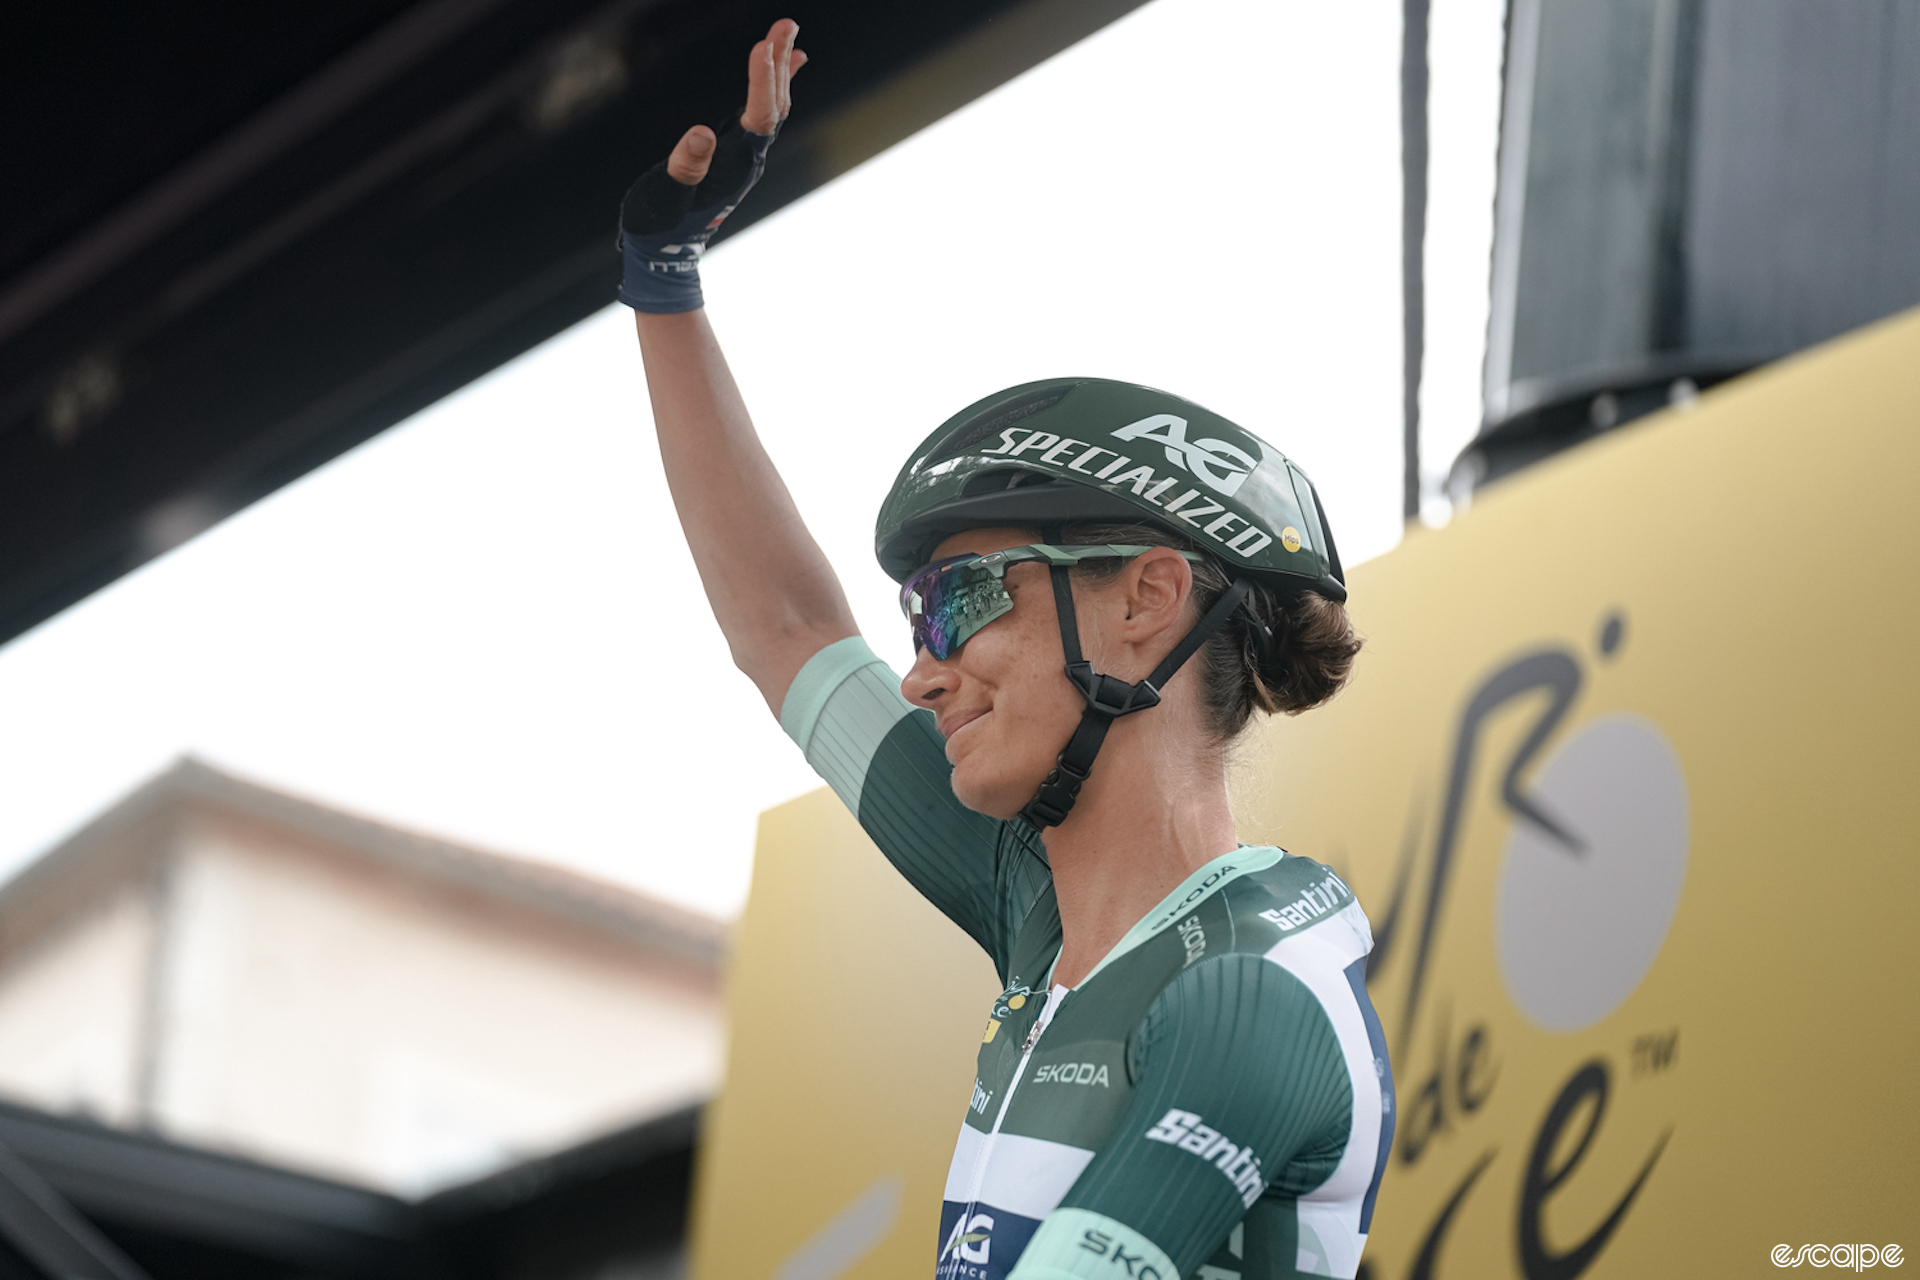 Ashleigh Moolman Pasio waves to the crowd at the start of stage 4 of the Tour de France Femmes. She's wearing the green jersey of the leader of the points competition, with a matching green helmet.